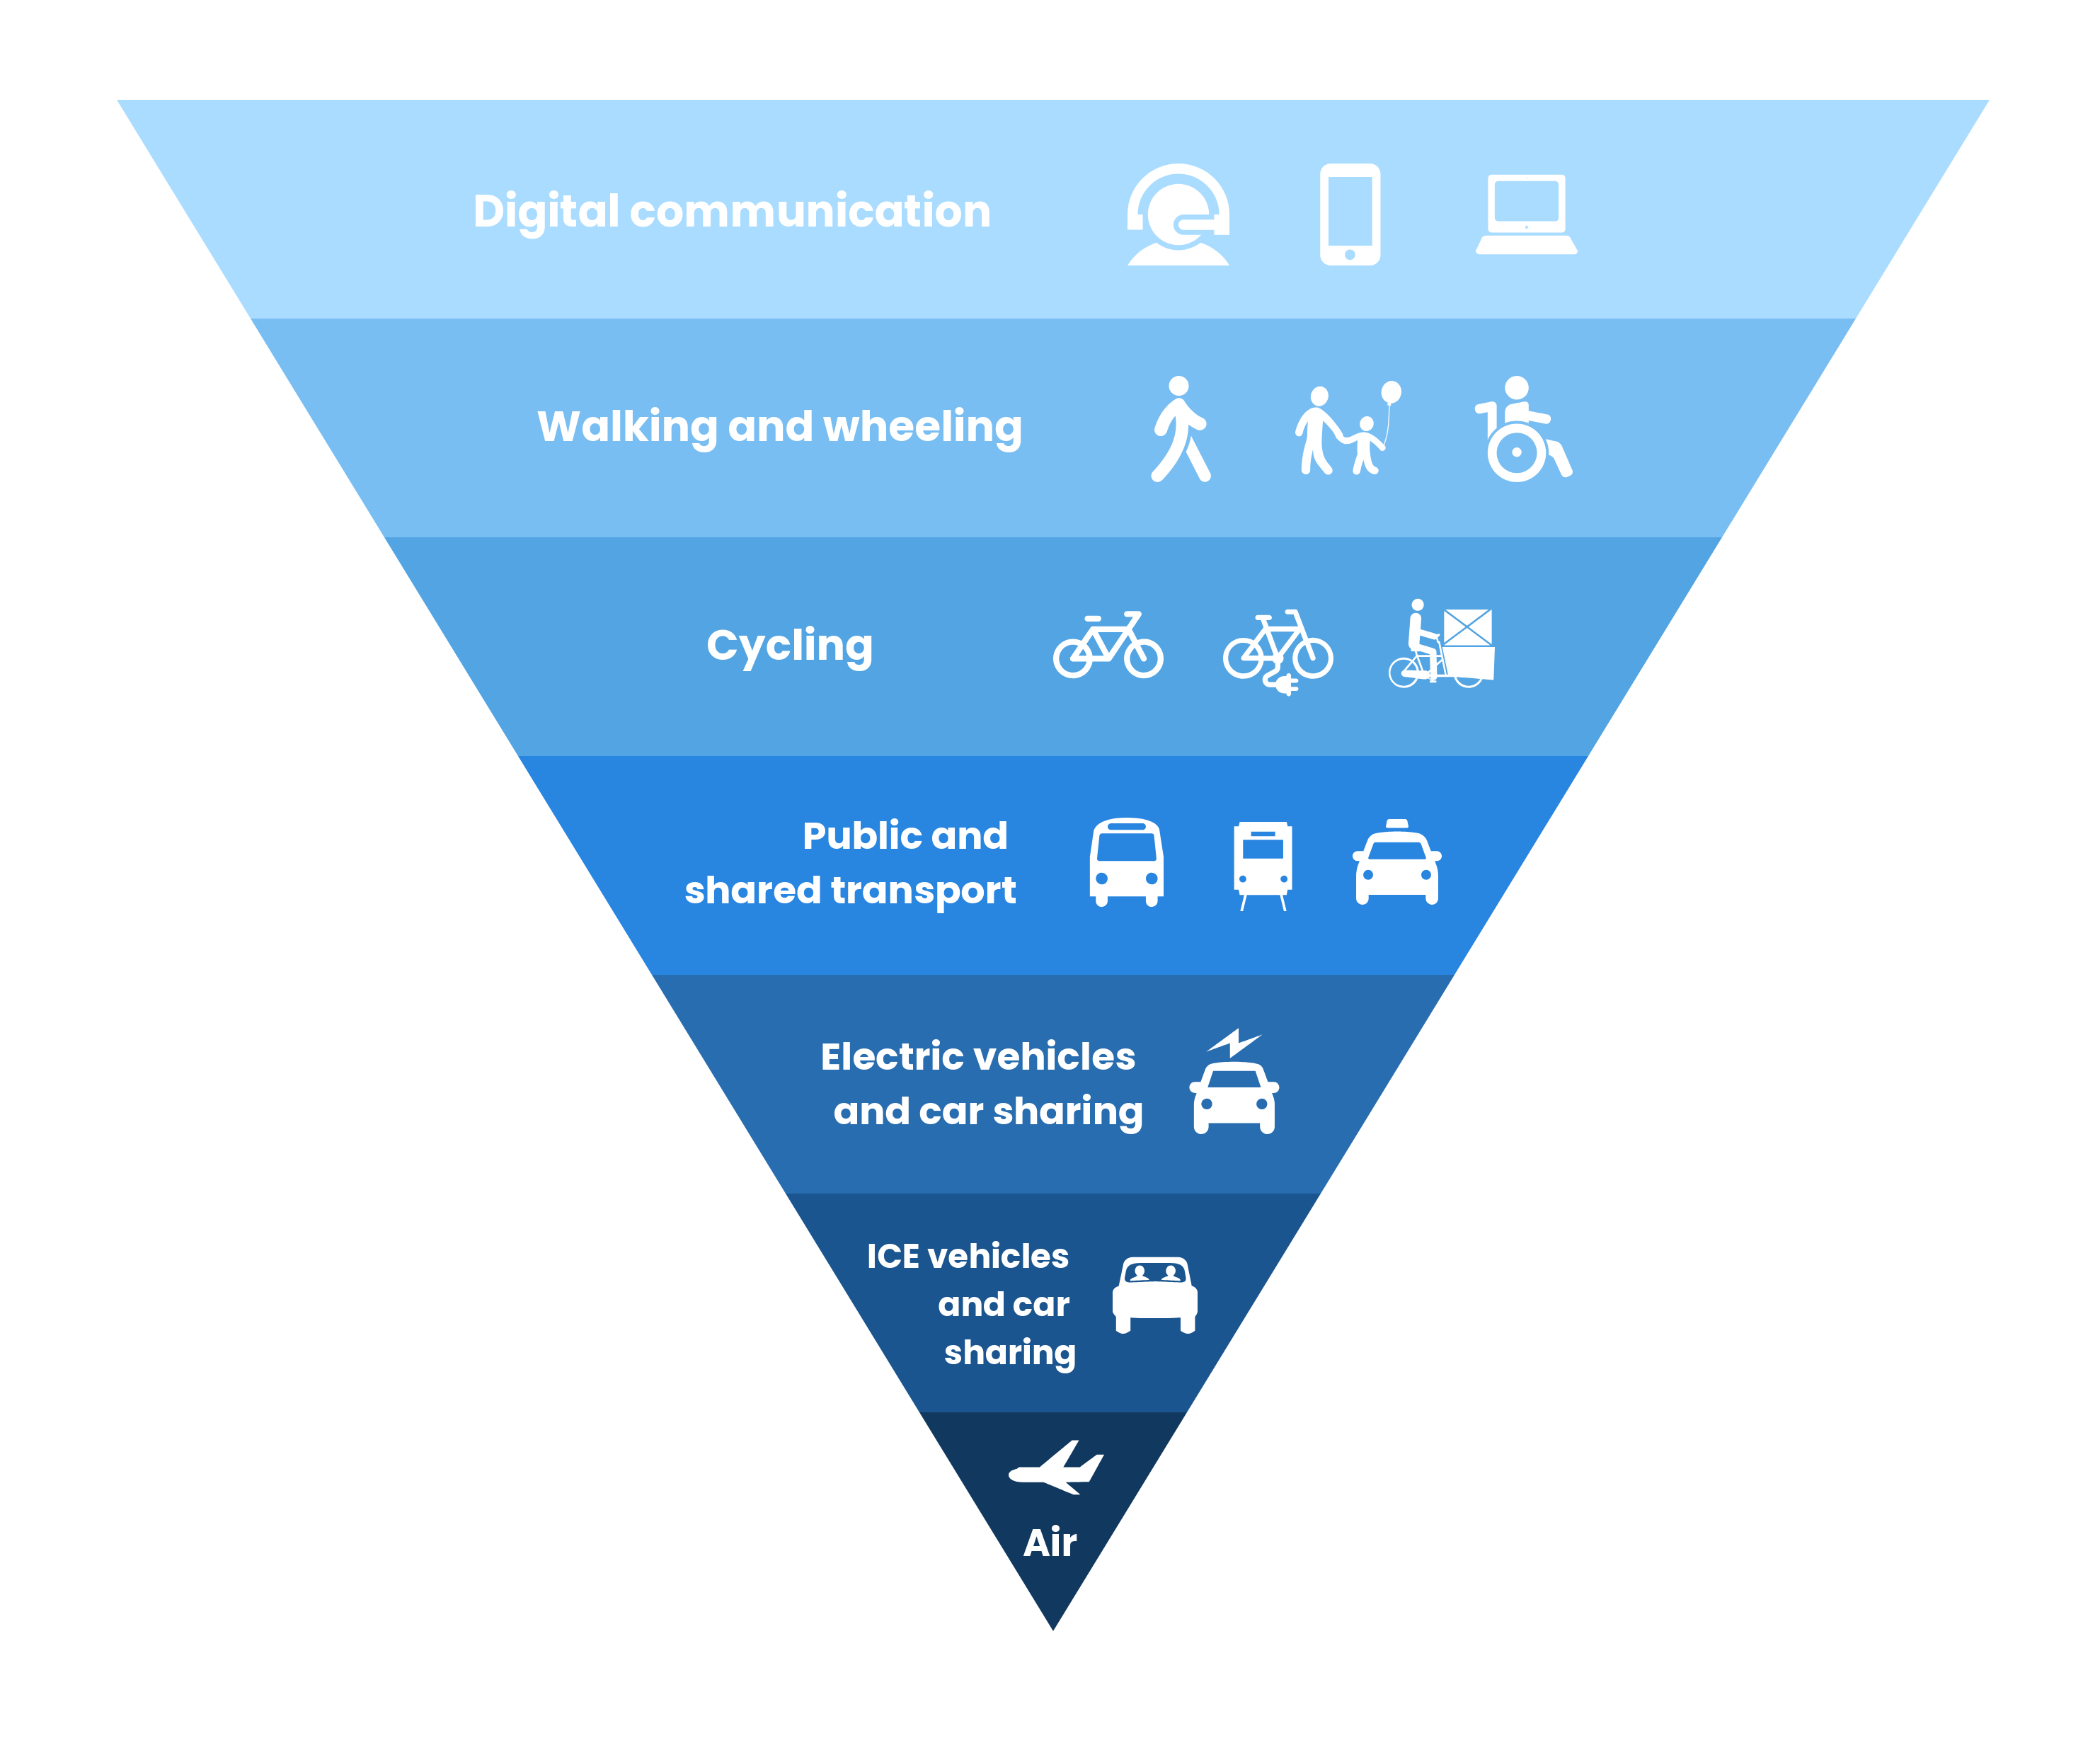 sustainable travel hierarchy 2021 image